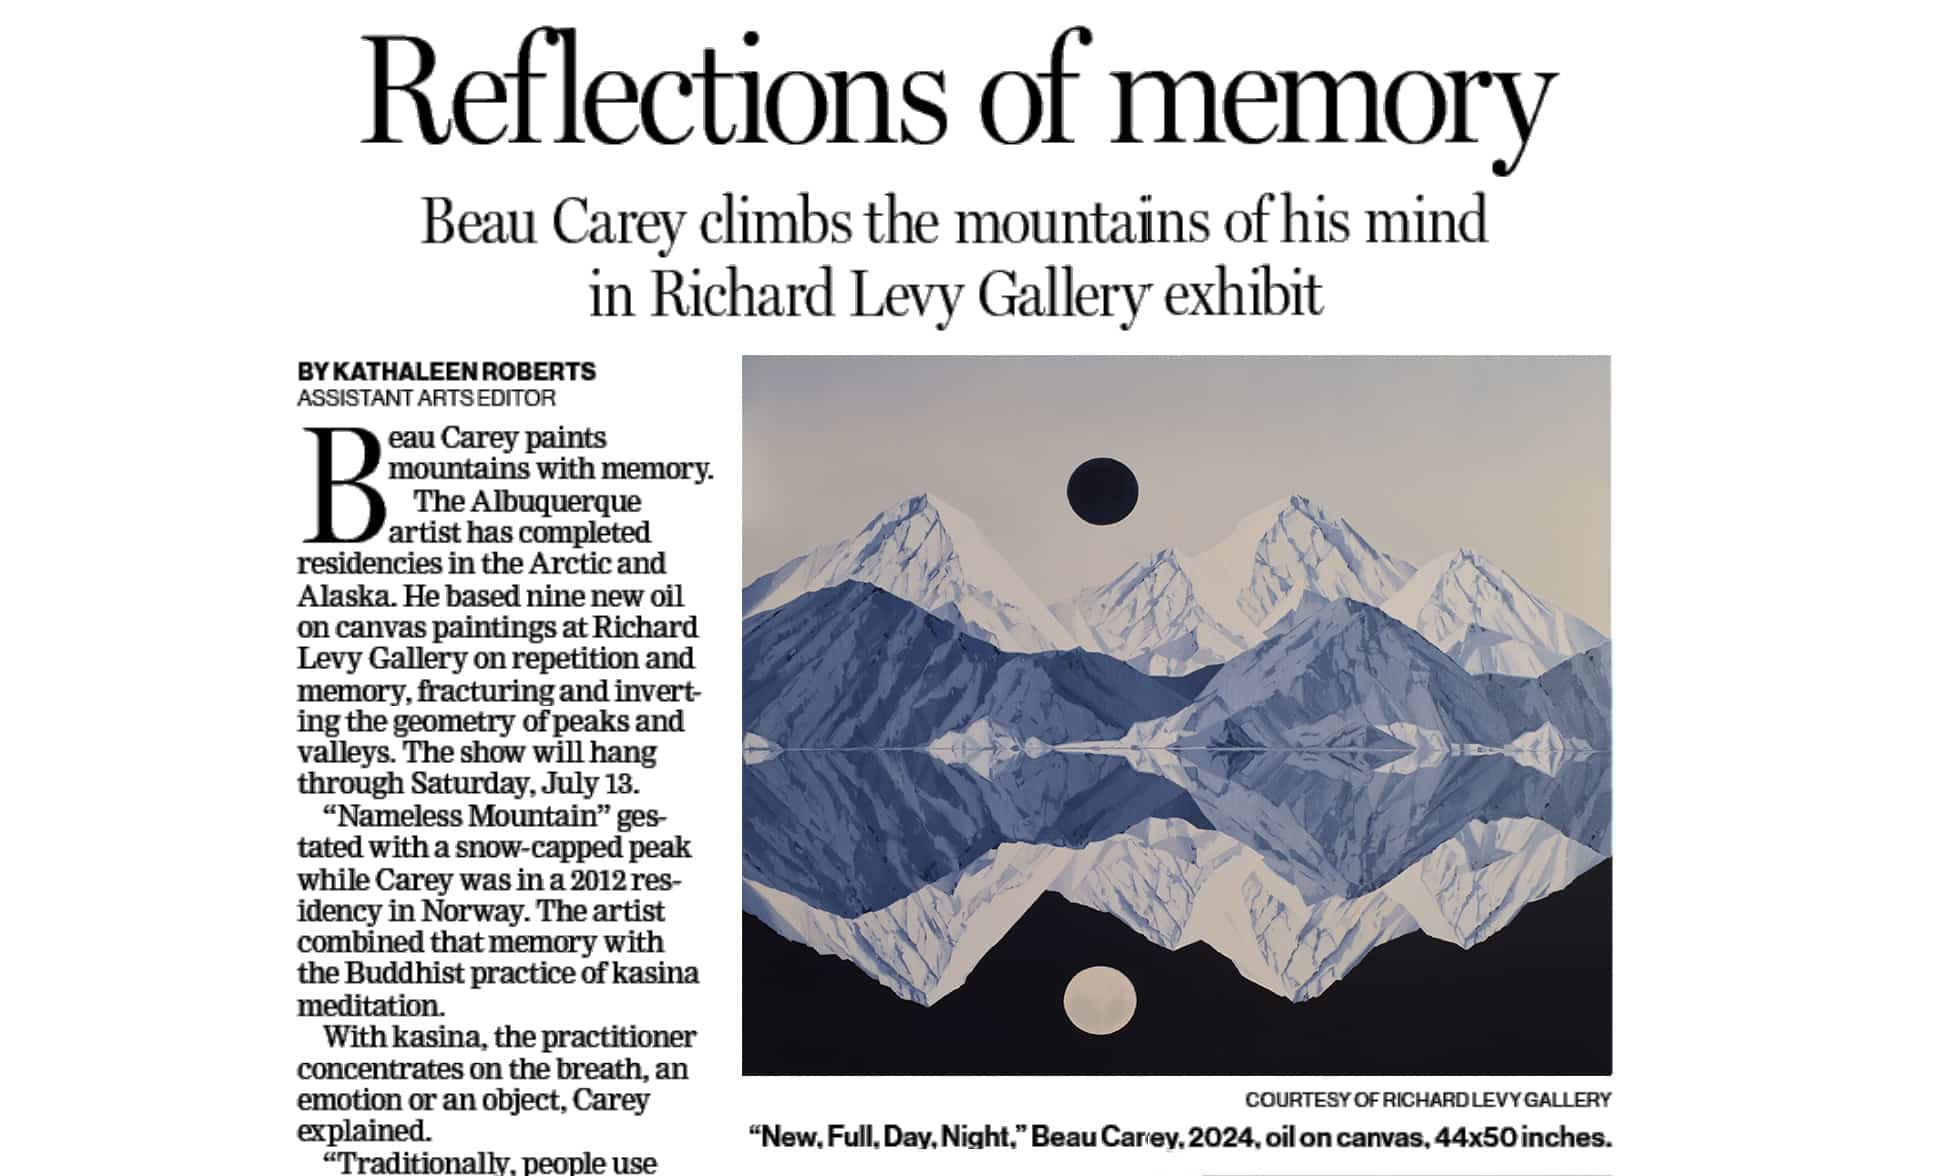 A newspaper article titled "Reflections of Memory" discusses Beau Carey's art exhibit at Richard Levy Gallery. It includes an image of Carey's painting "New, Full, Day, Night," depicting mountain ranges, a blue sky, with reflections in water, created on oil canvas.